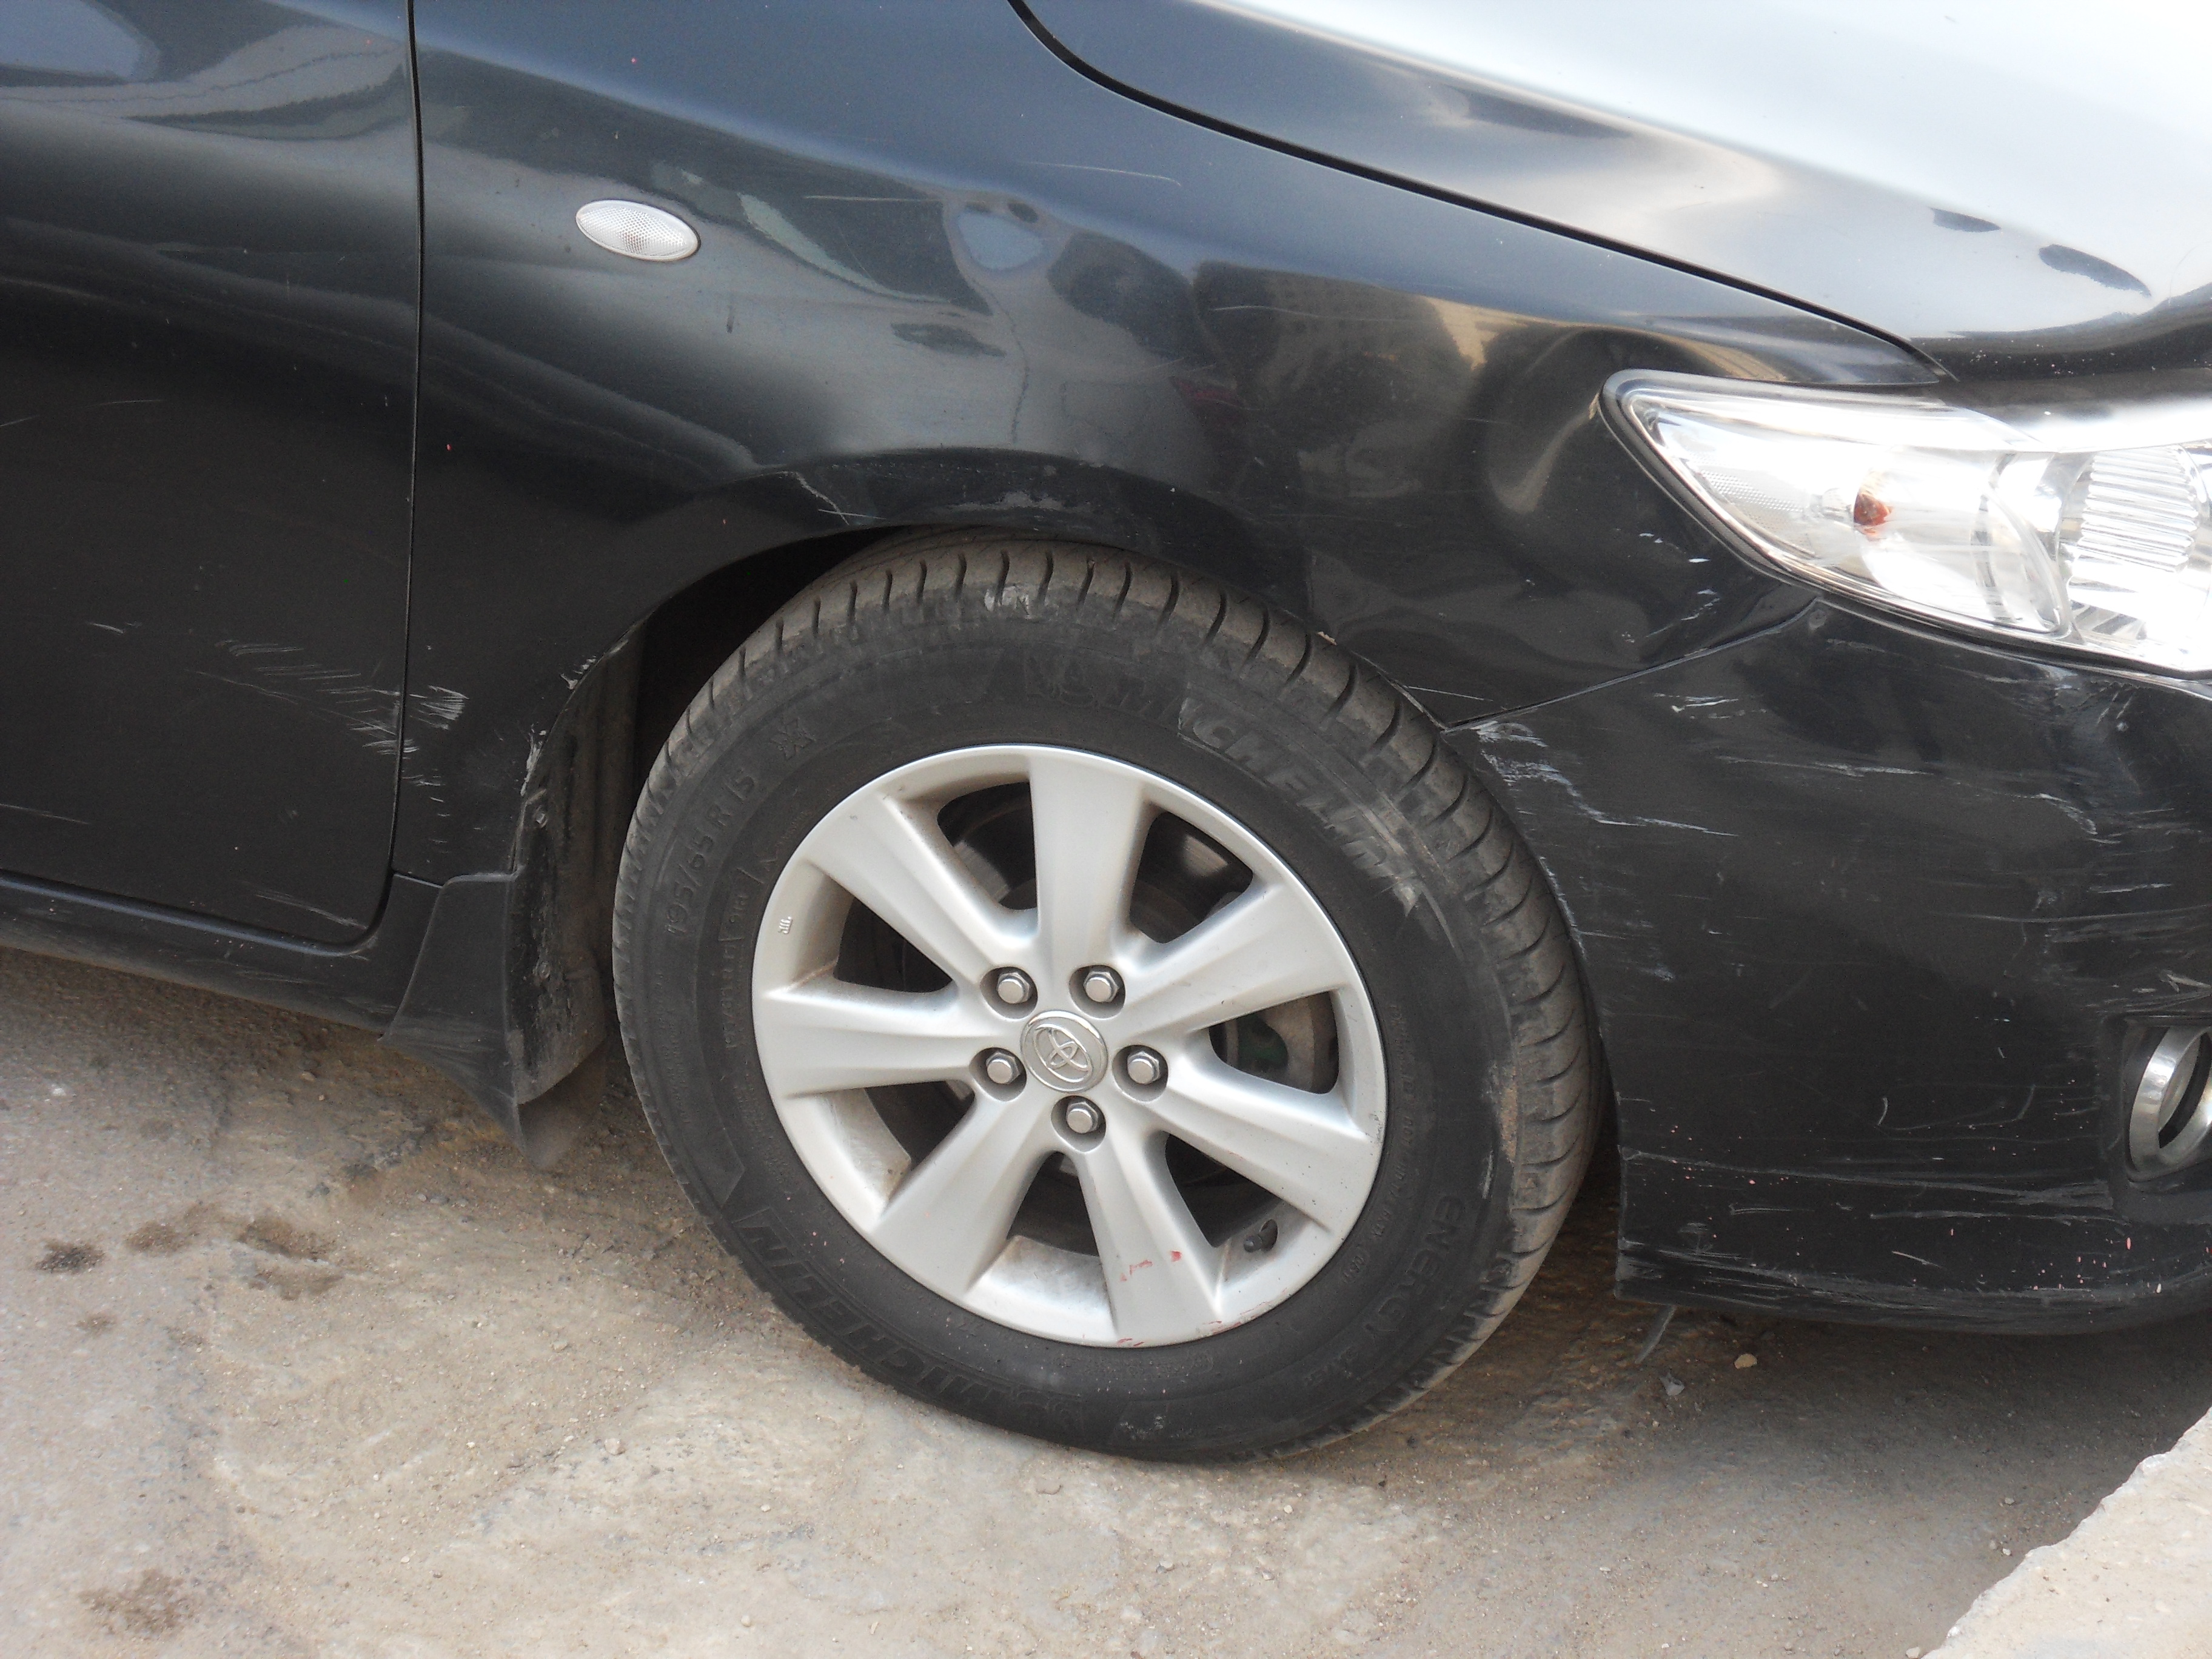 If there's a car in Egypt without a major scratch or bump, then it is either a) still in the showroom, or b) you are being lied to as such a car cannot exist in Egypt.